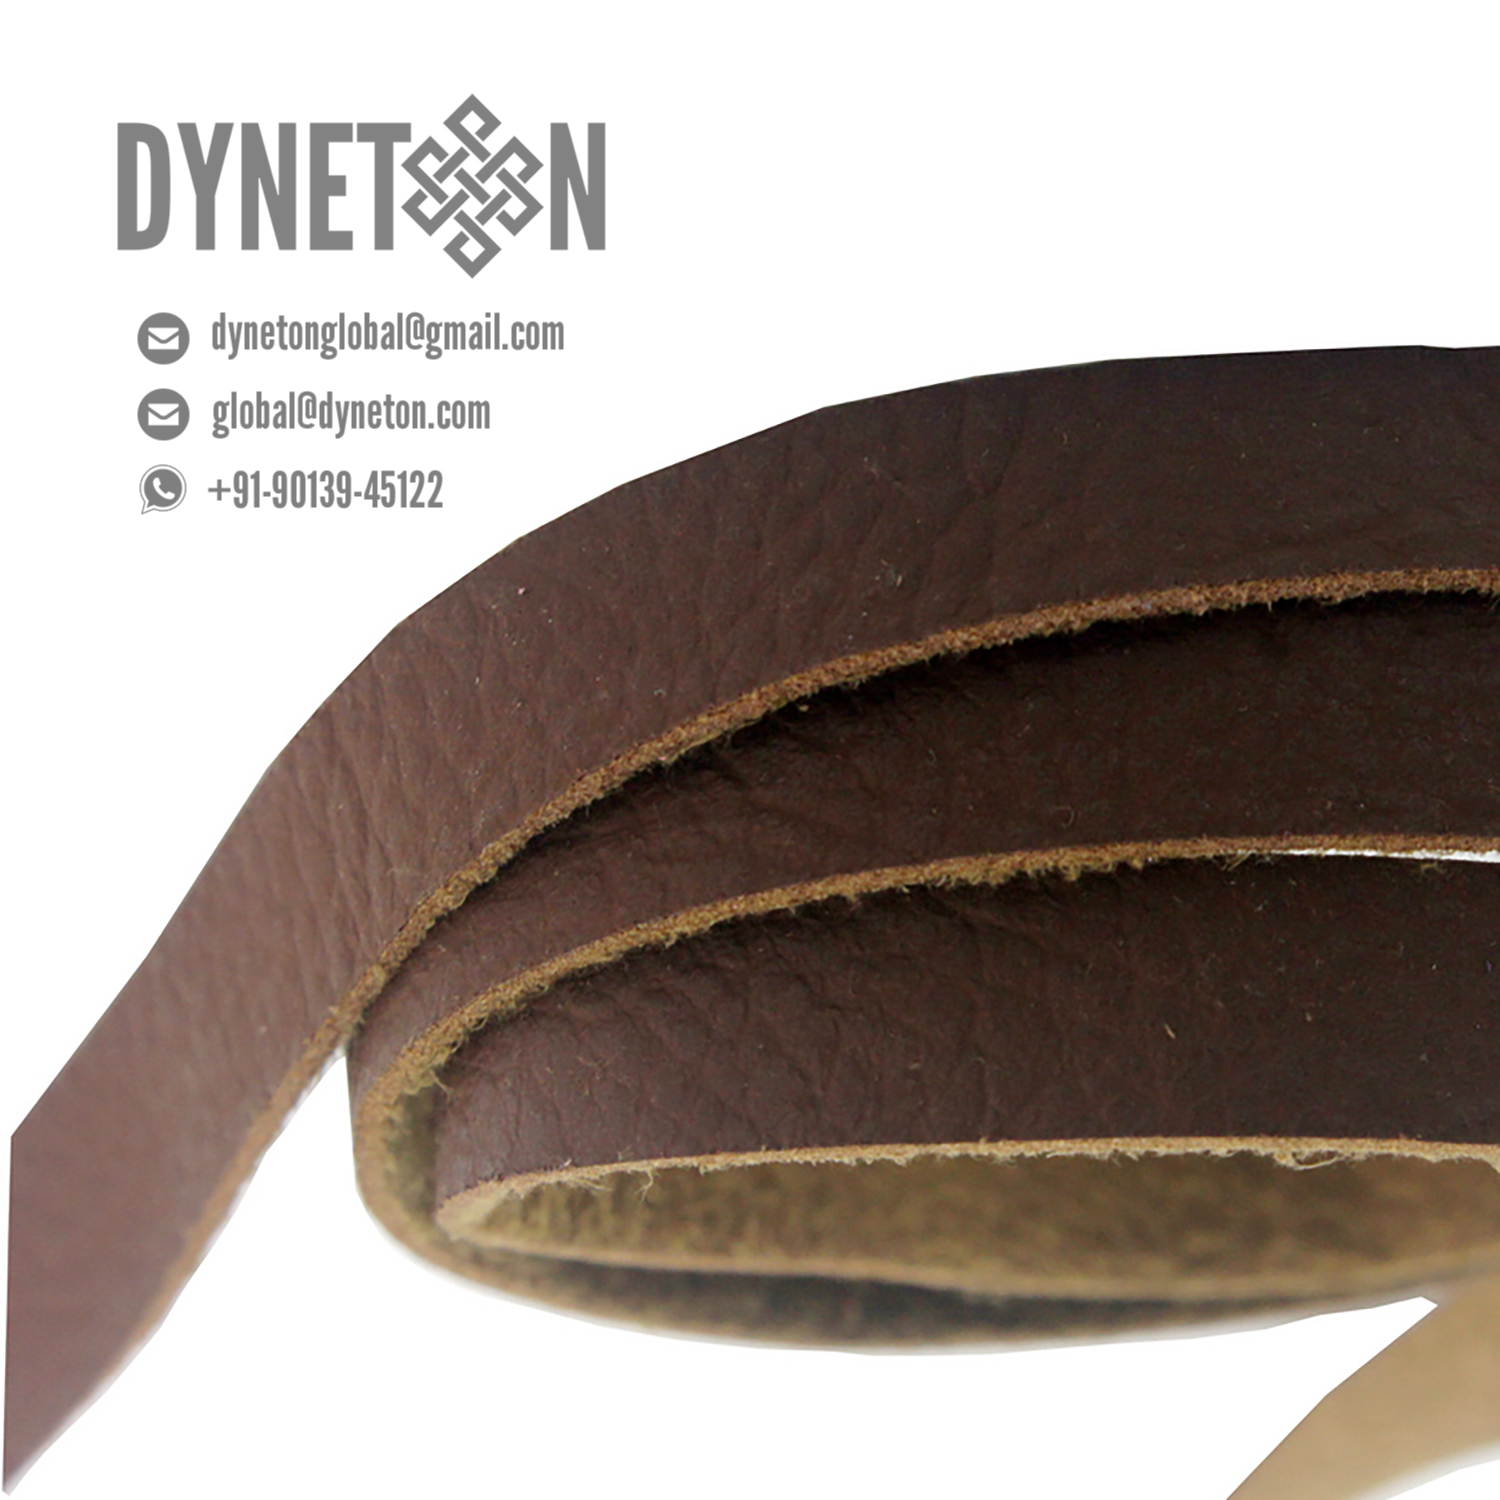 5mm Flat Leather Cord - DYNETON / Flat Leather Cords 5 mm